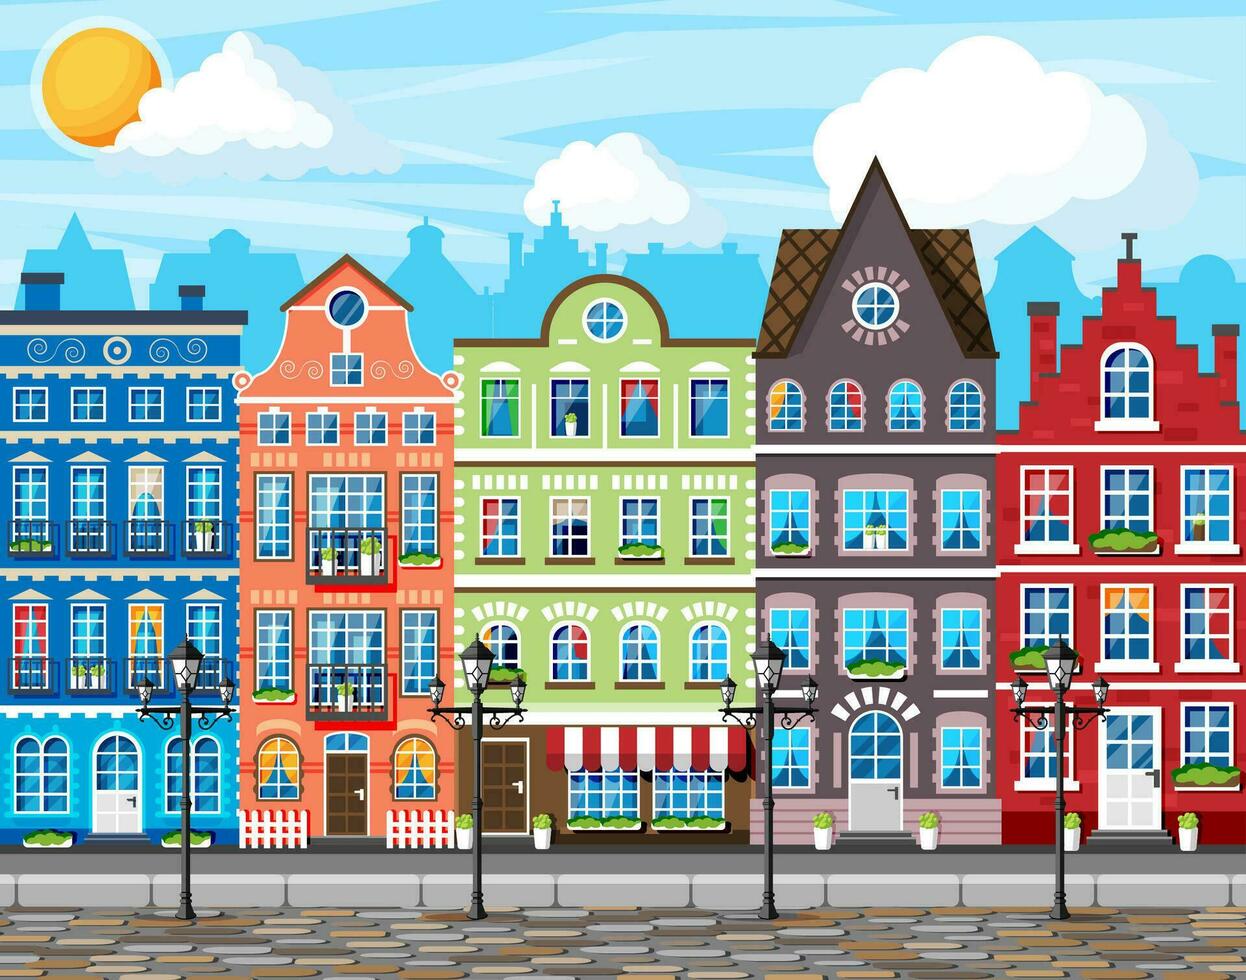 Traditional European Town. Old City Street with Lamp and Paving Stones Road. Medieval Urban Landscape. Street with Colorful Houses in Different Architectural Styles. Cartoon Flat Vector Illustration